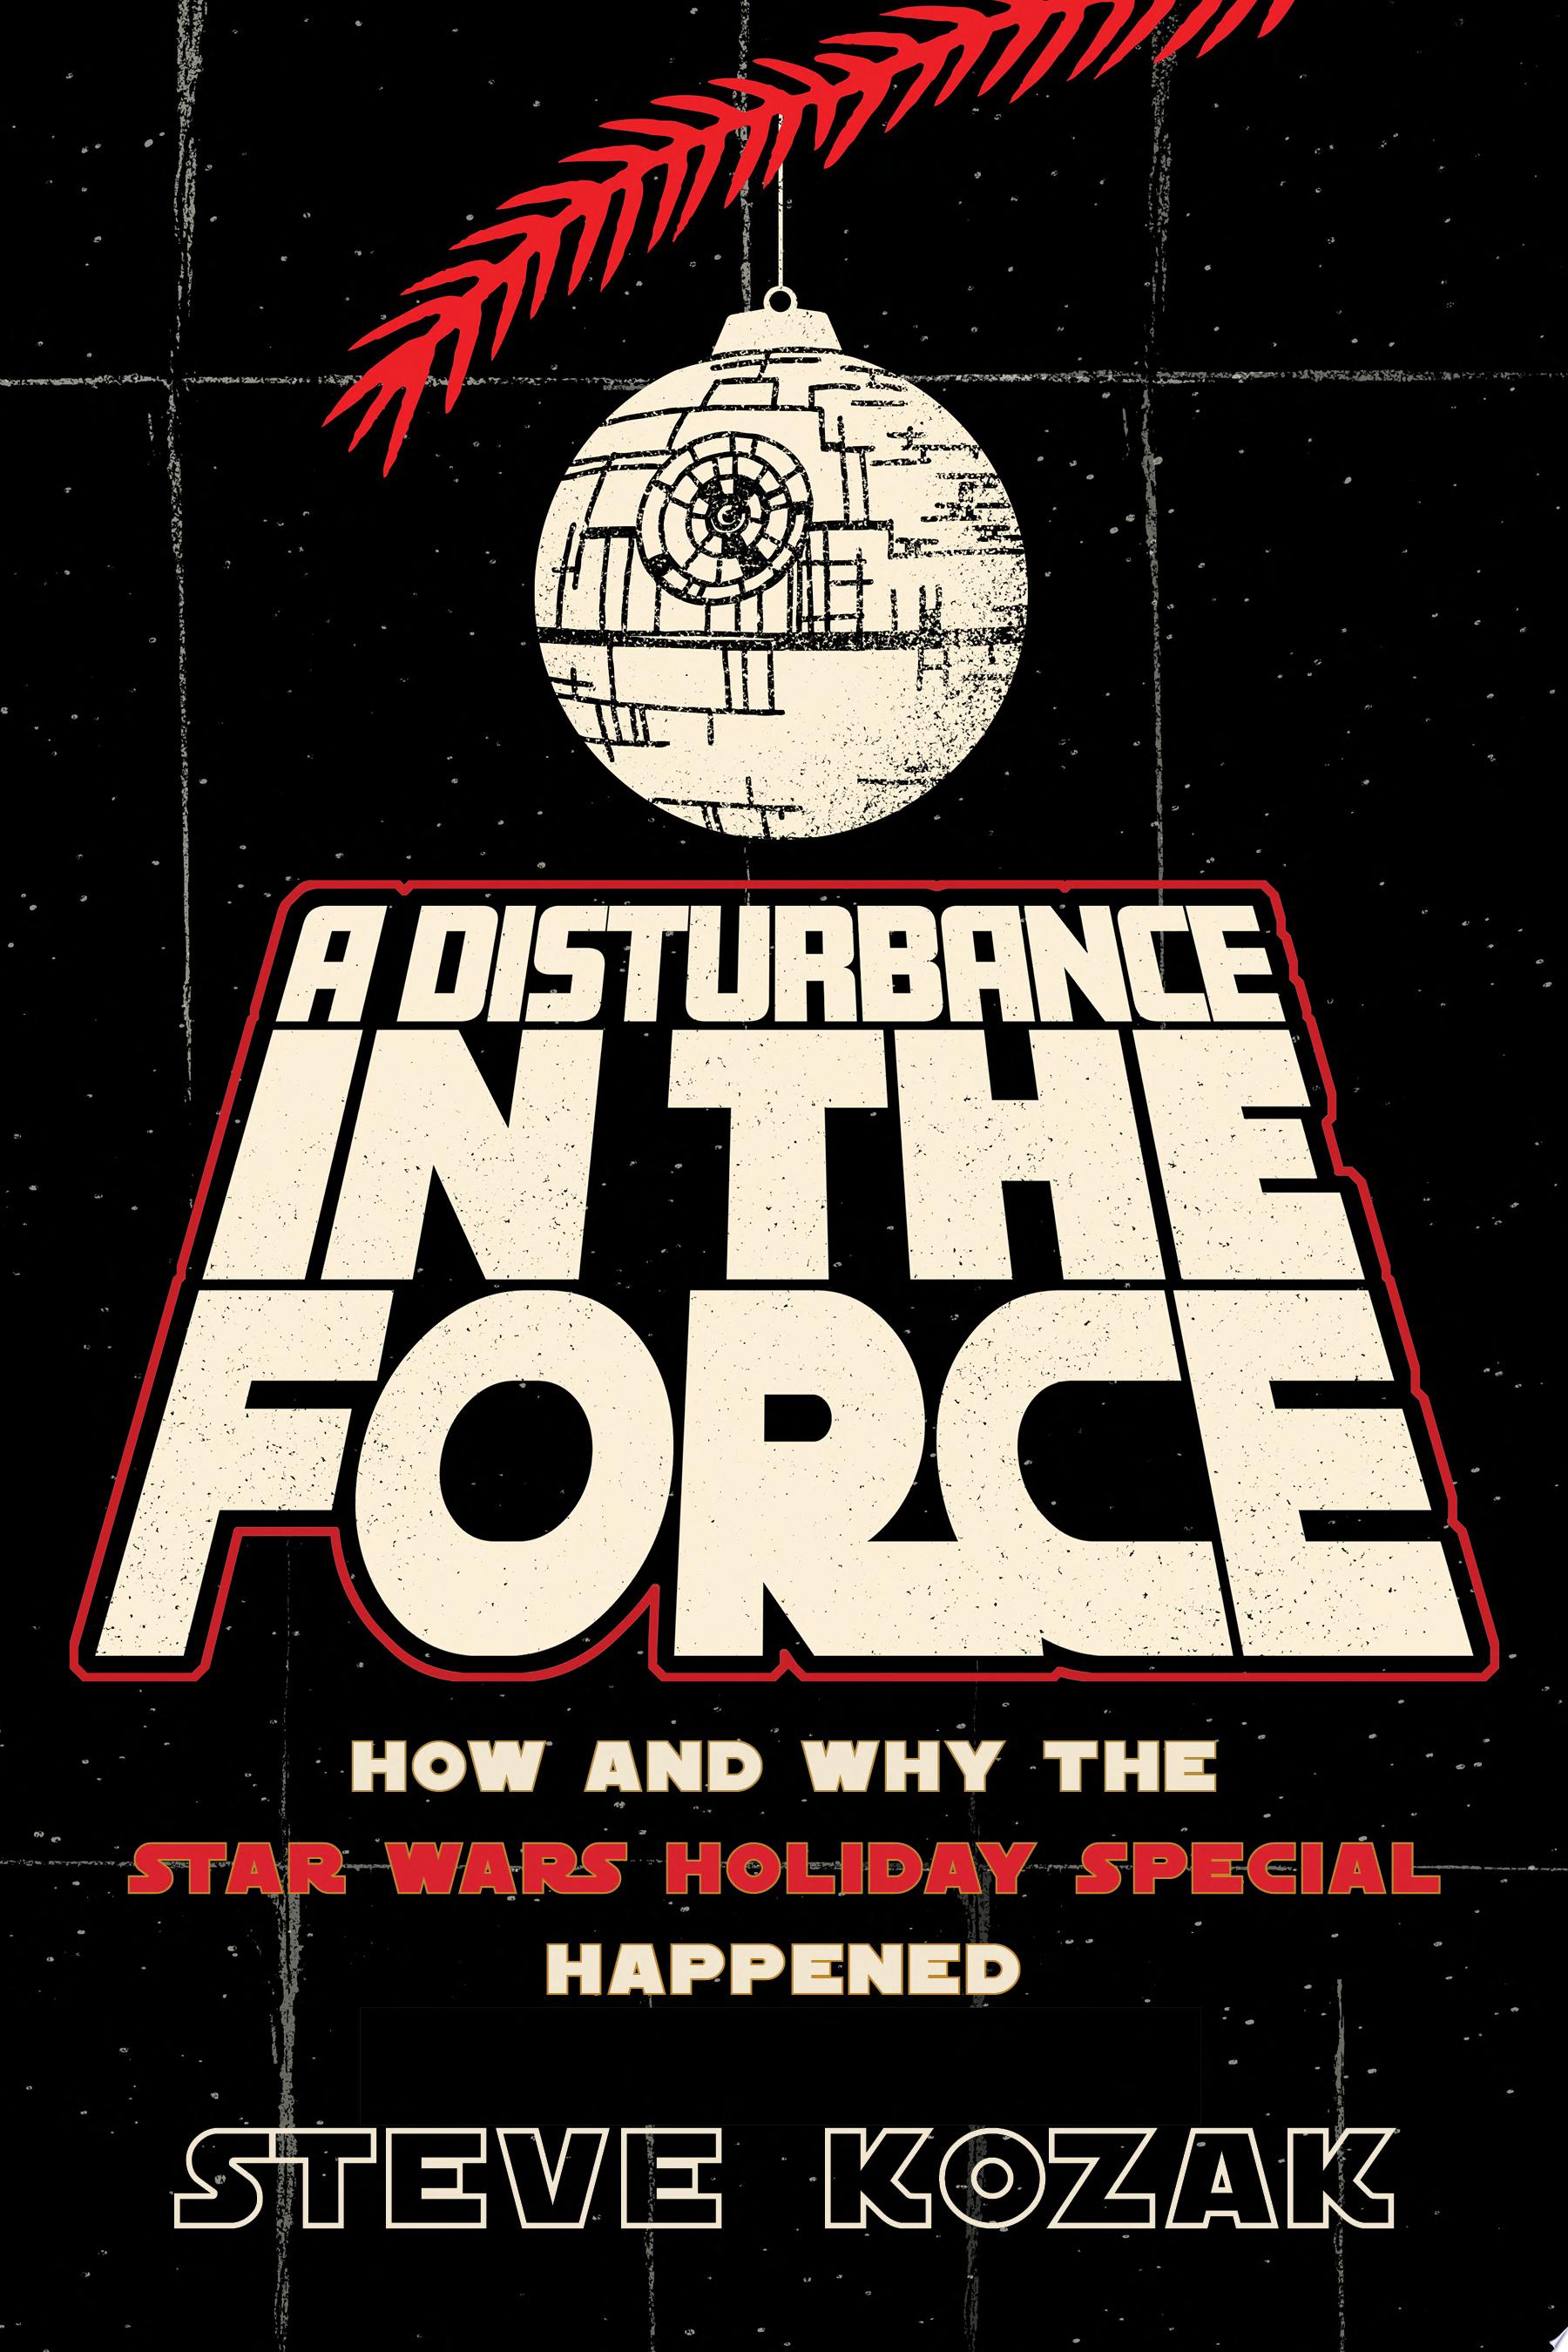 Image for "A Disturbance in the Force"